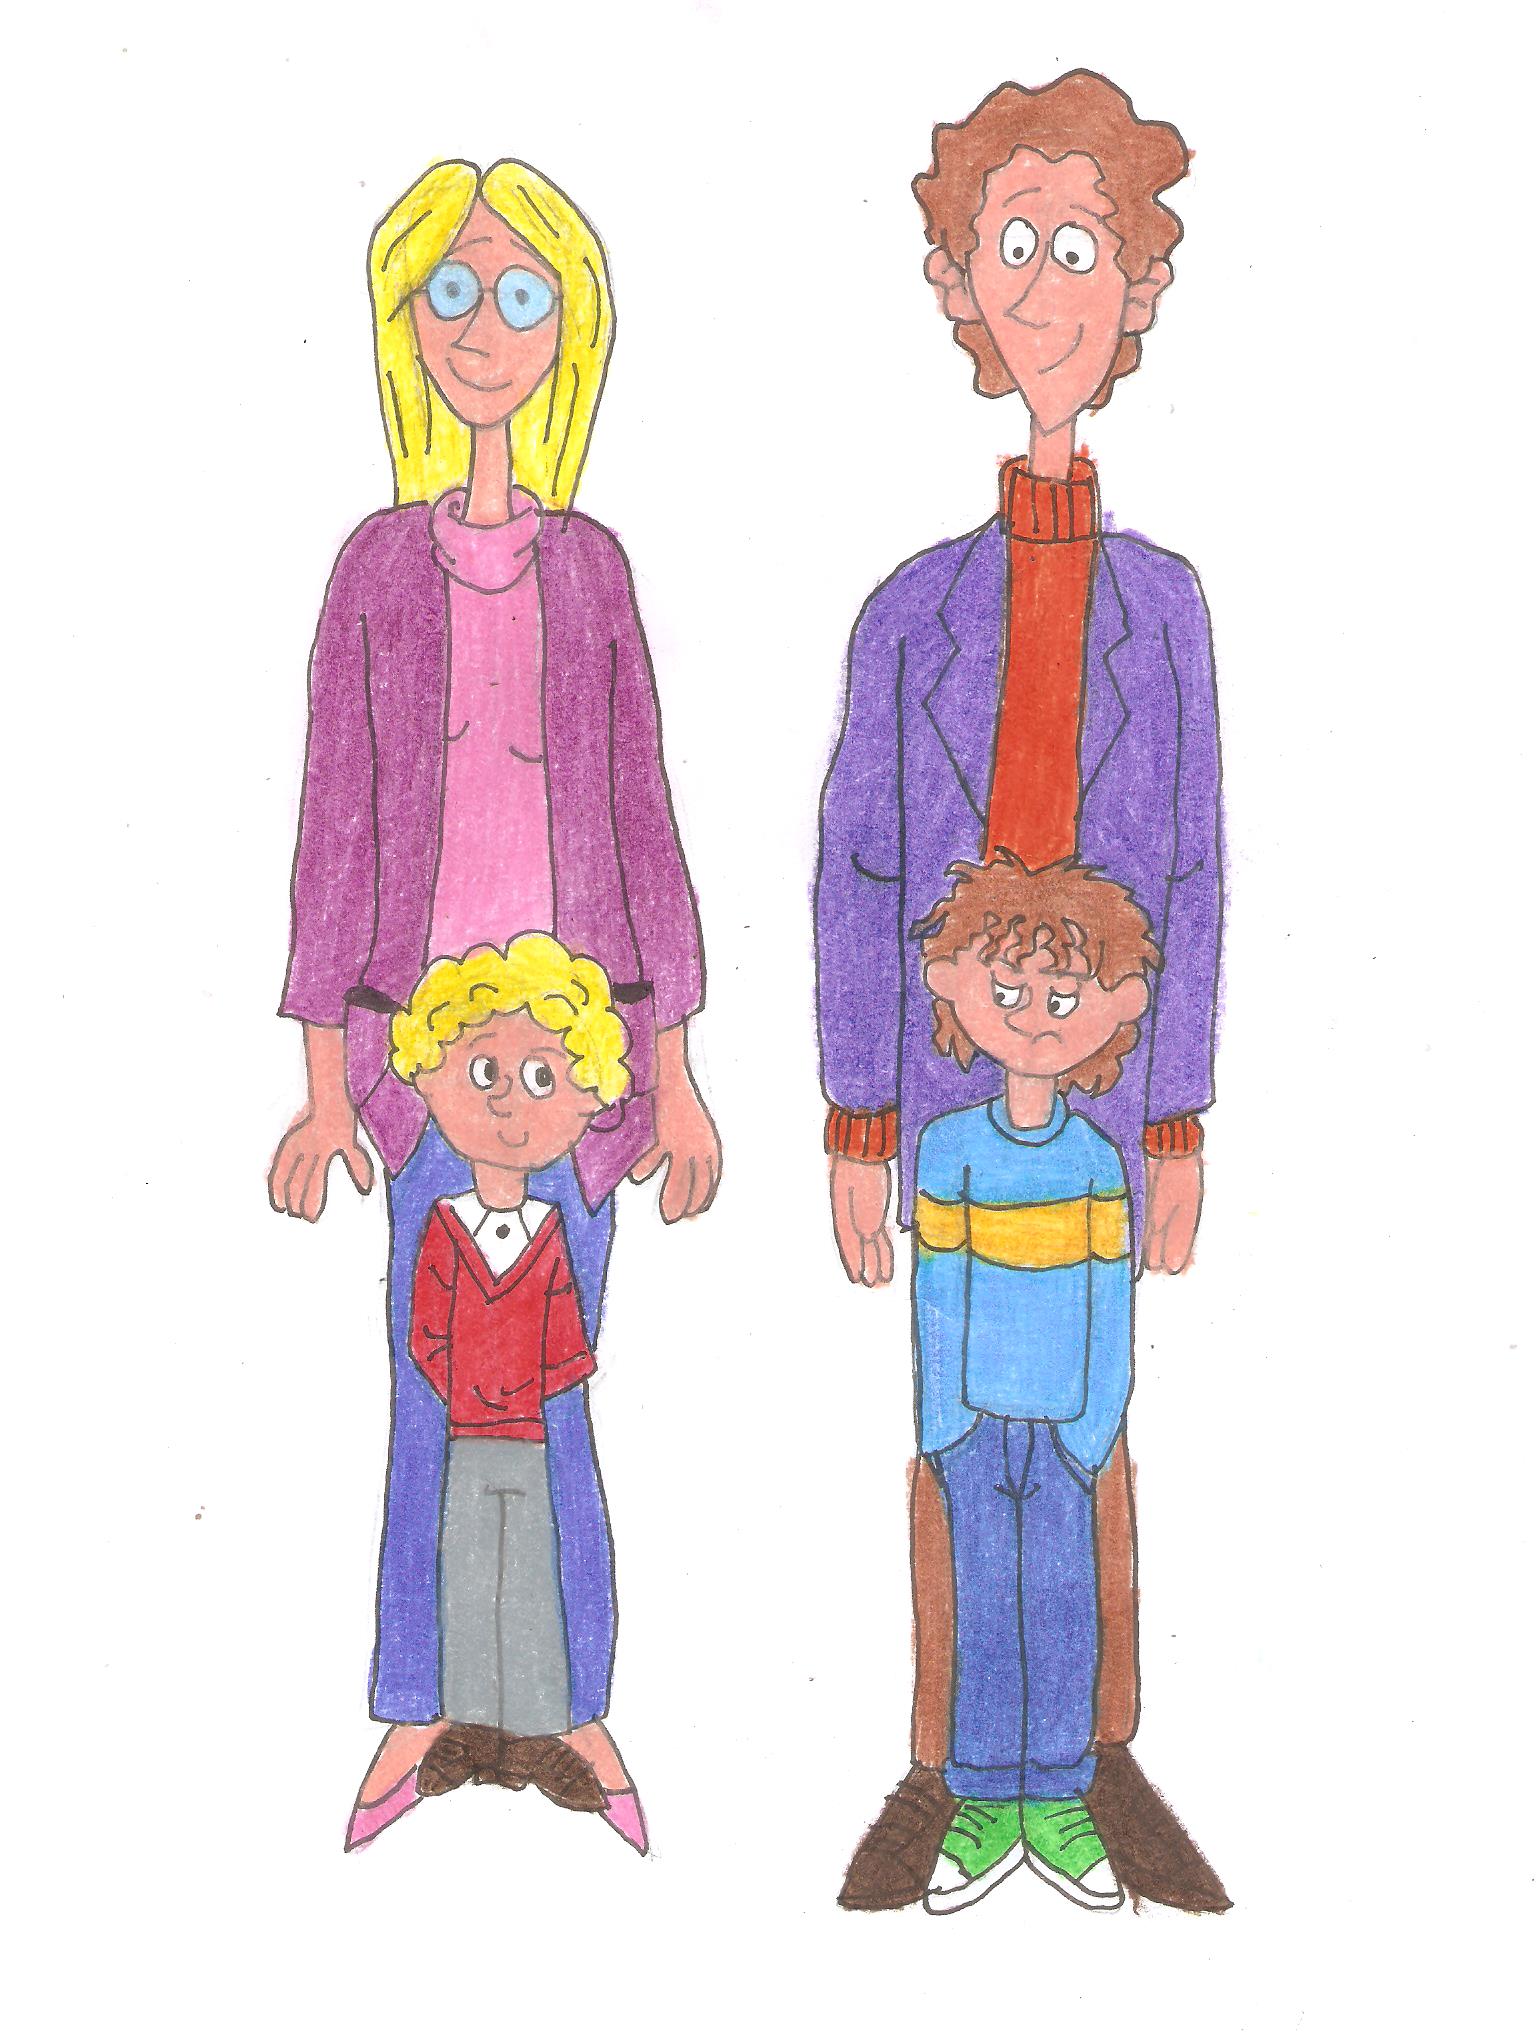 Horrid Henry, Perfect Peter and her parents by matiriani28 on DeviantArt